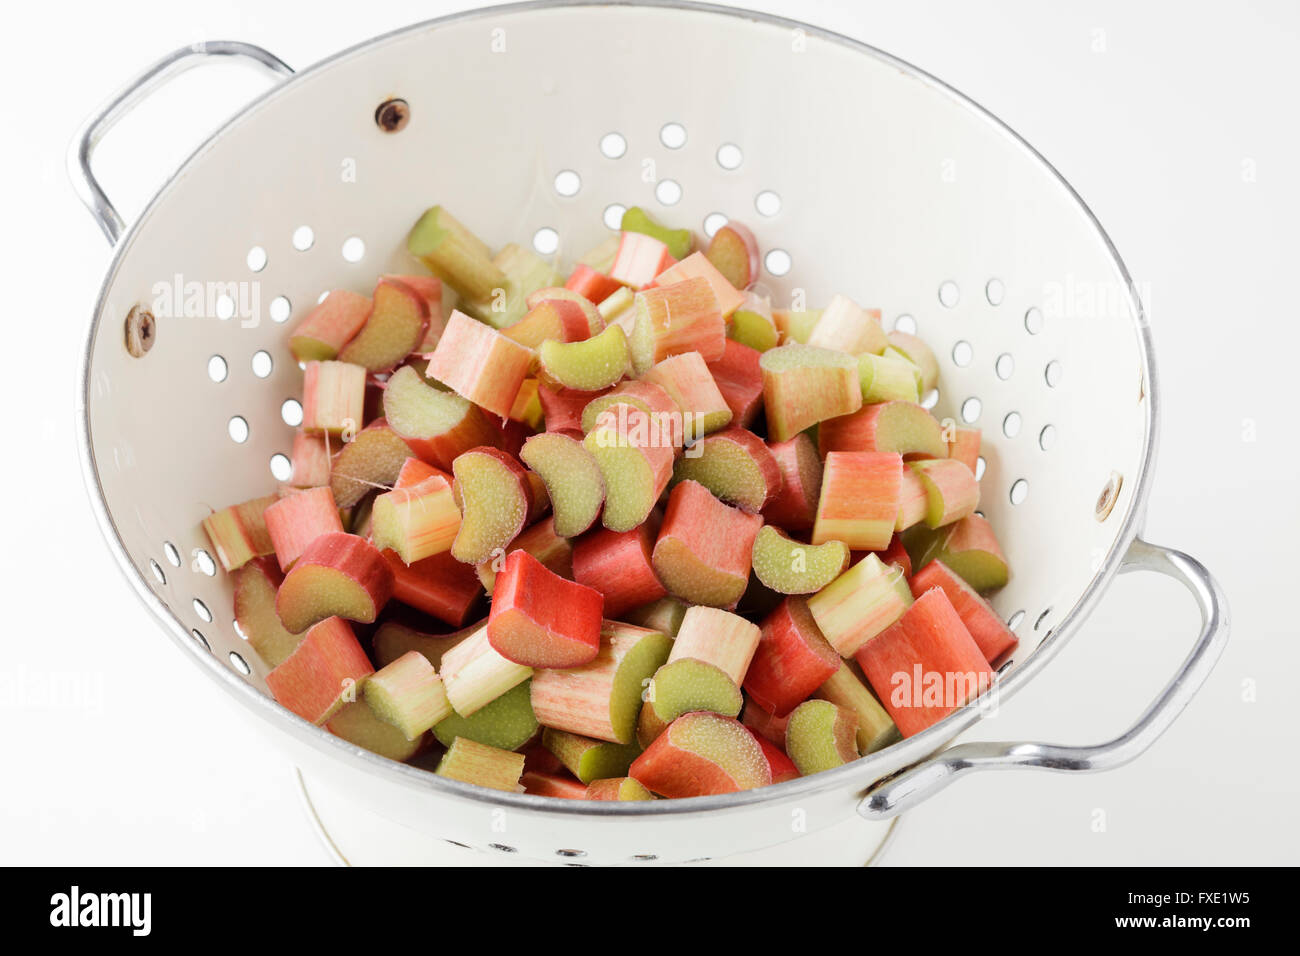 Rhubarb in a colander Stock Photo